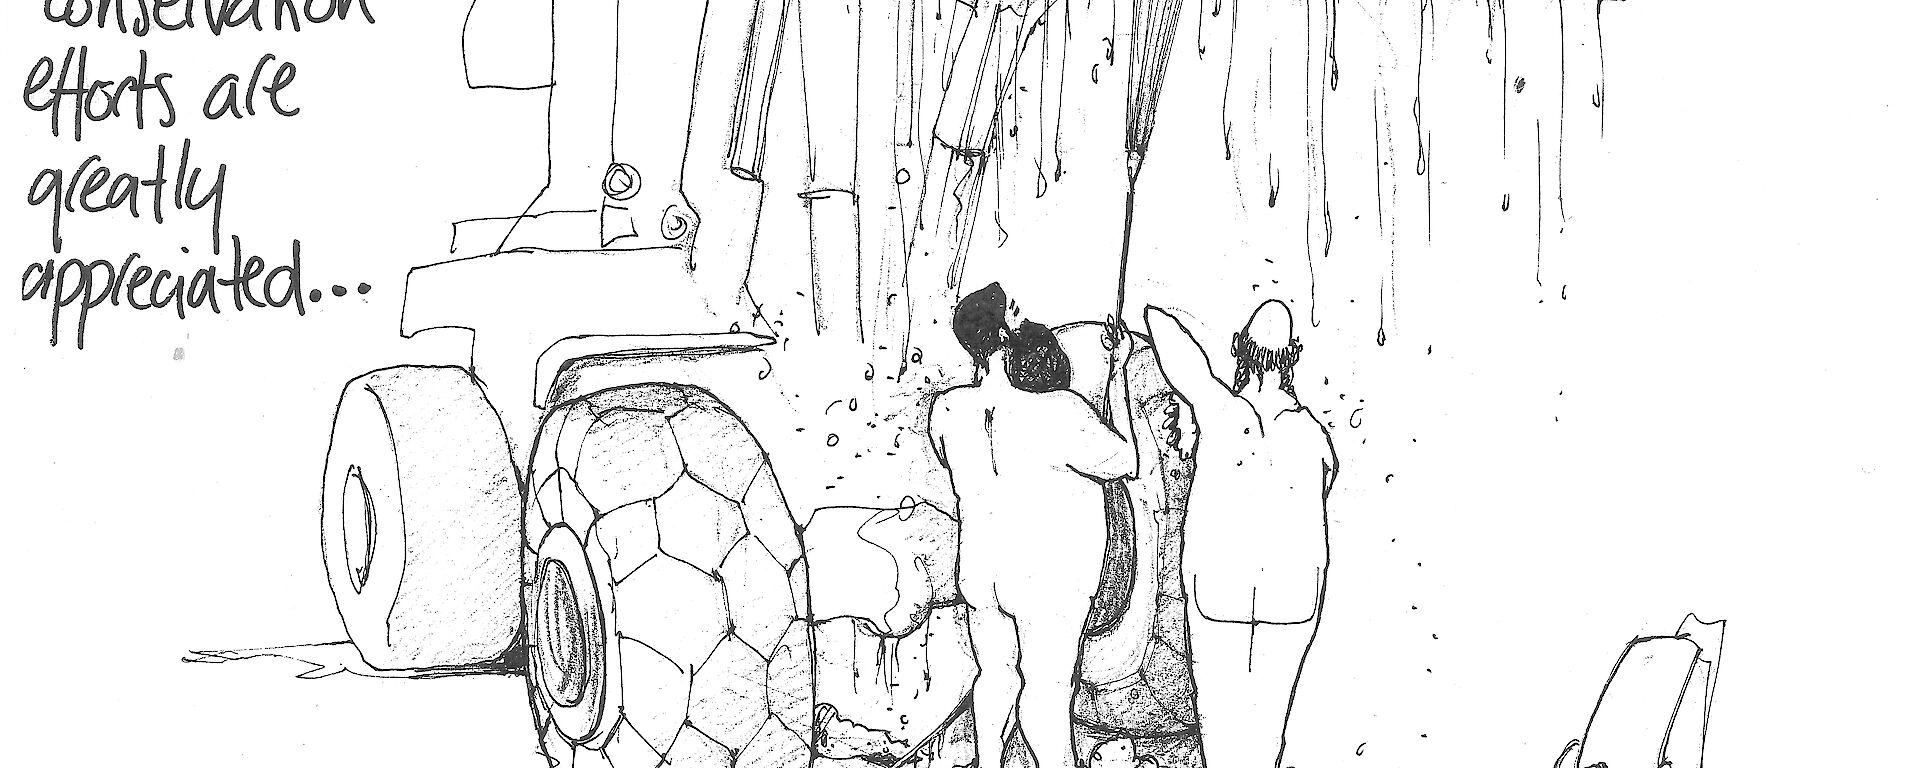 An illustration of two expeditioners showering with vehicles under hoses